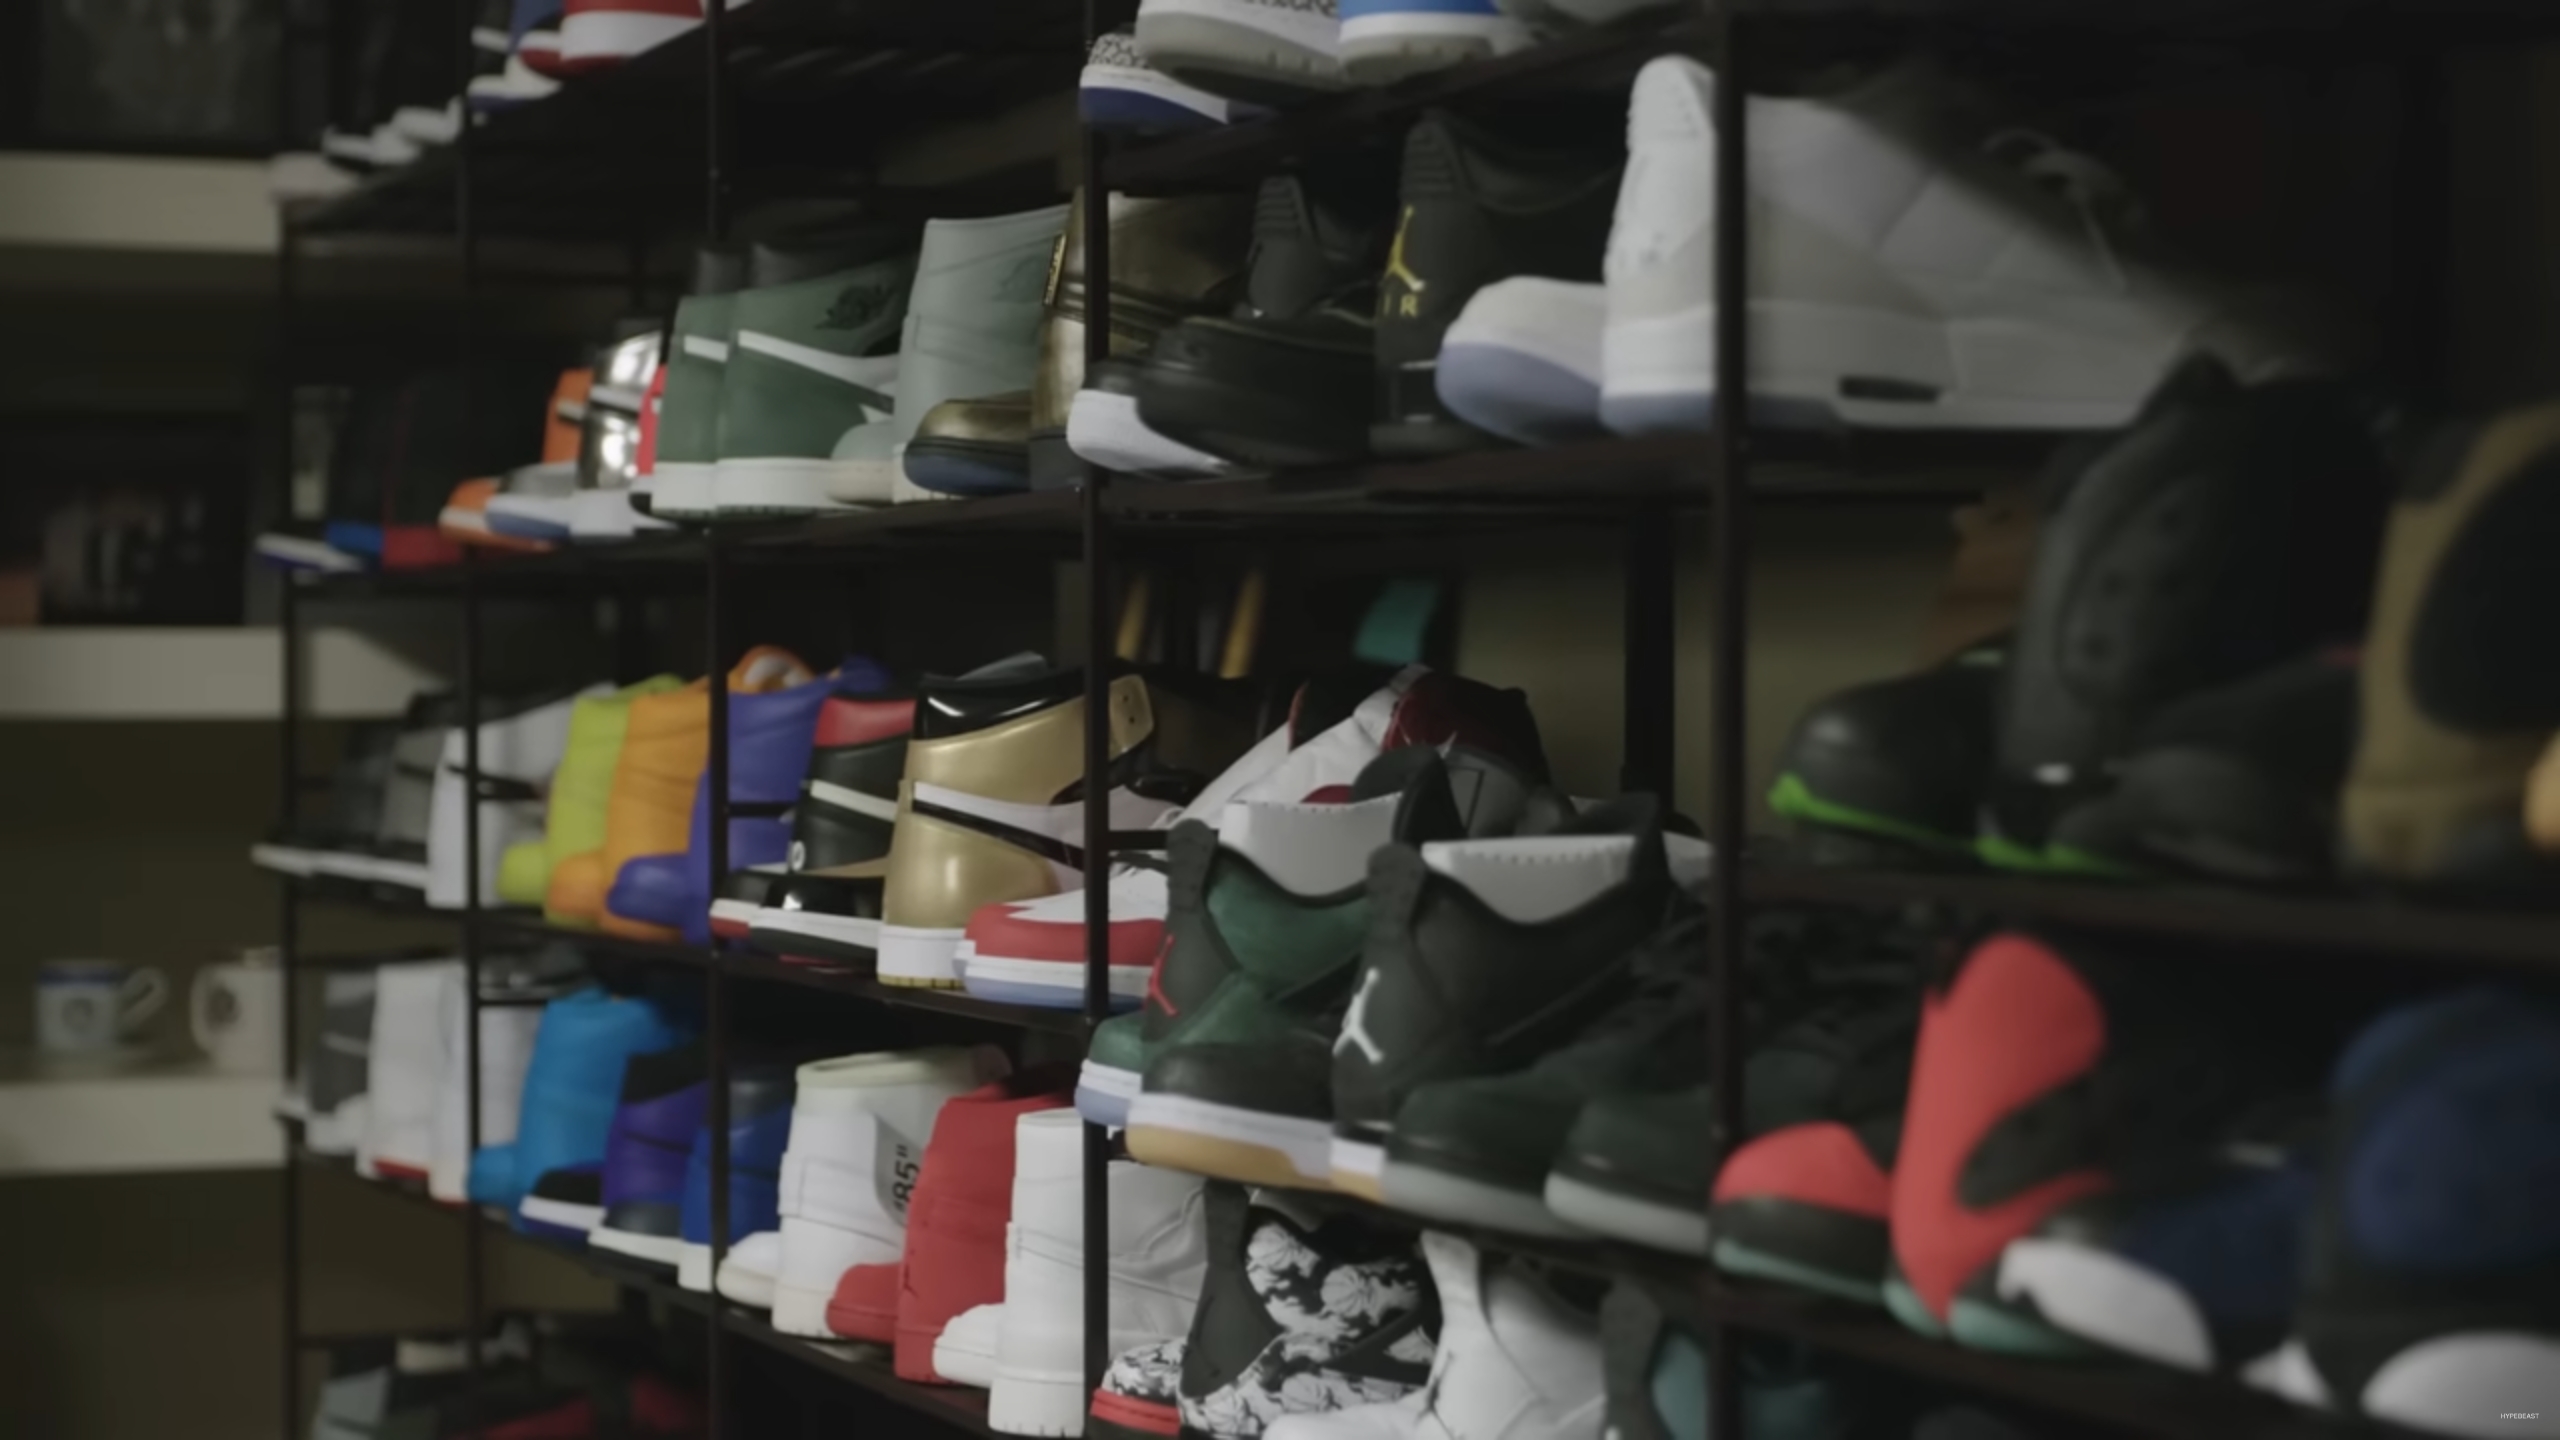 Butler keeps his shoes in a massive walk-in closet